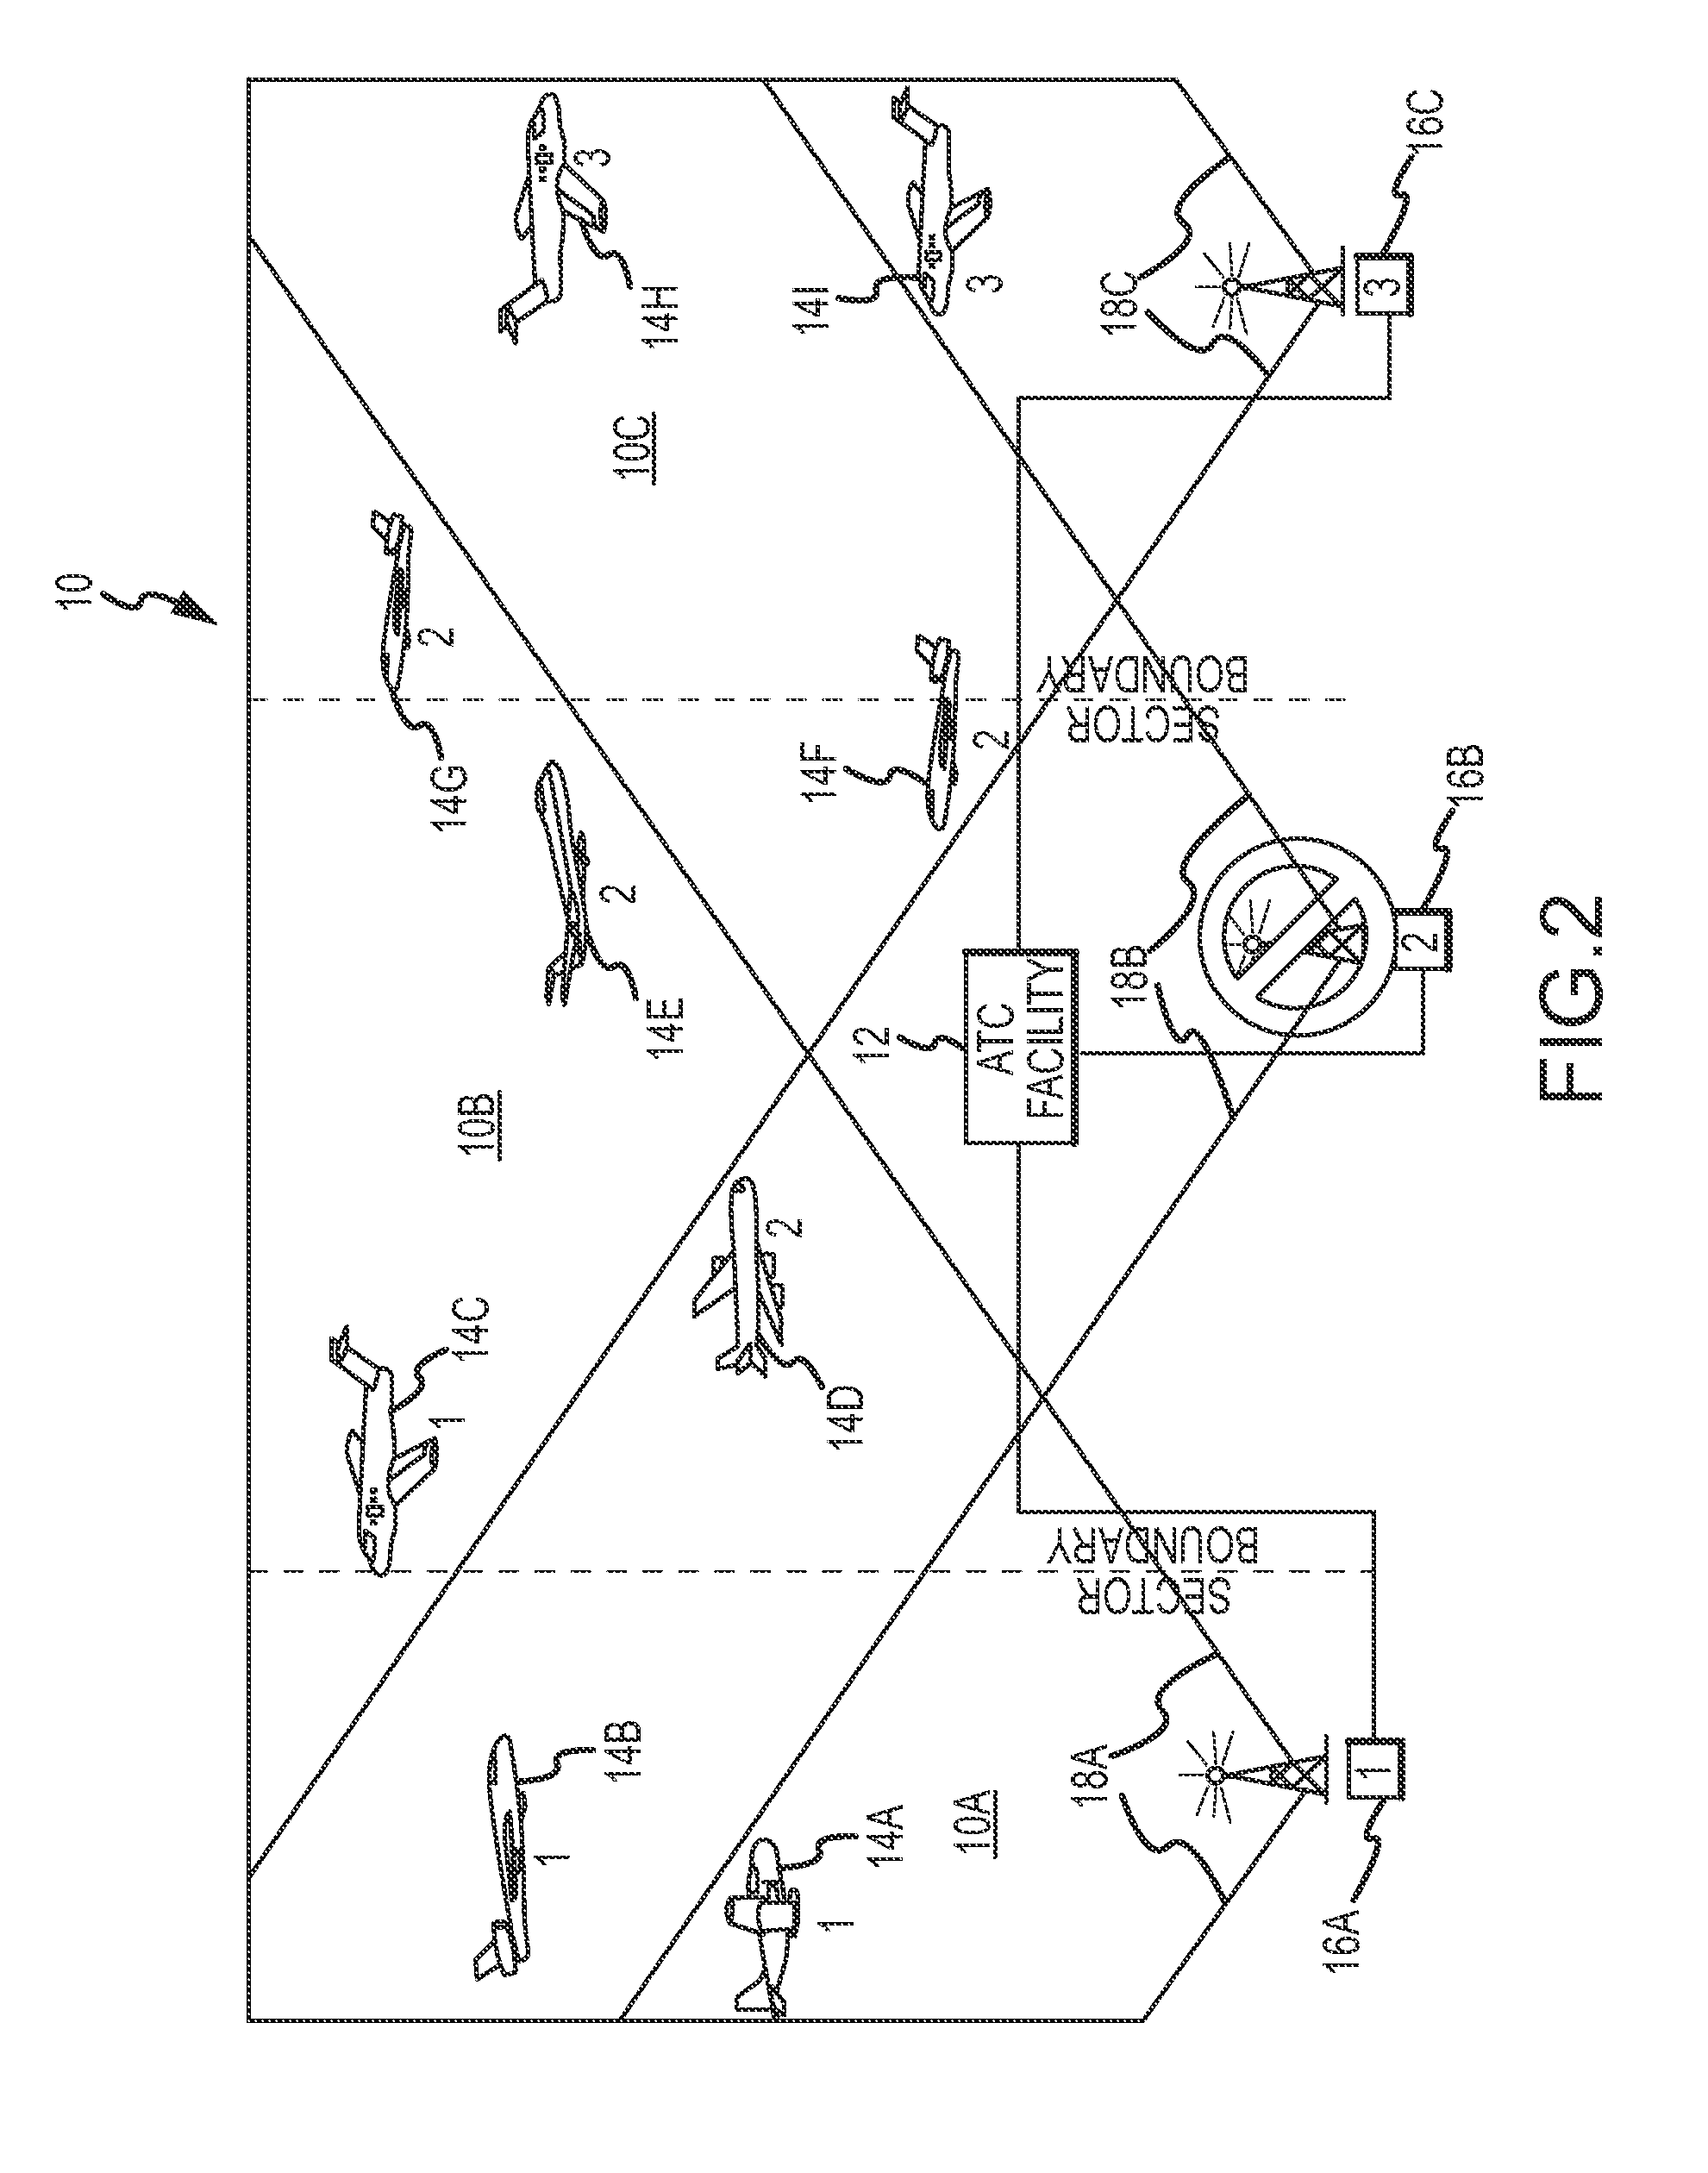 Managing an air-ground communications network with air traffic control information